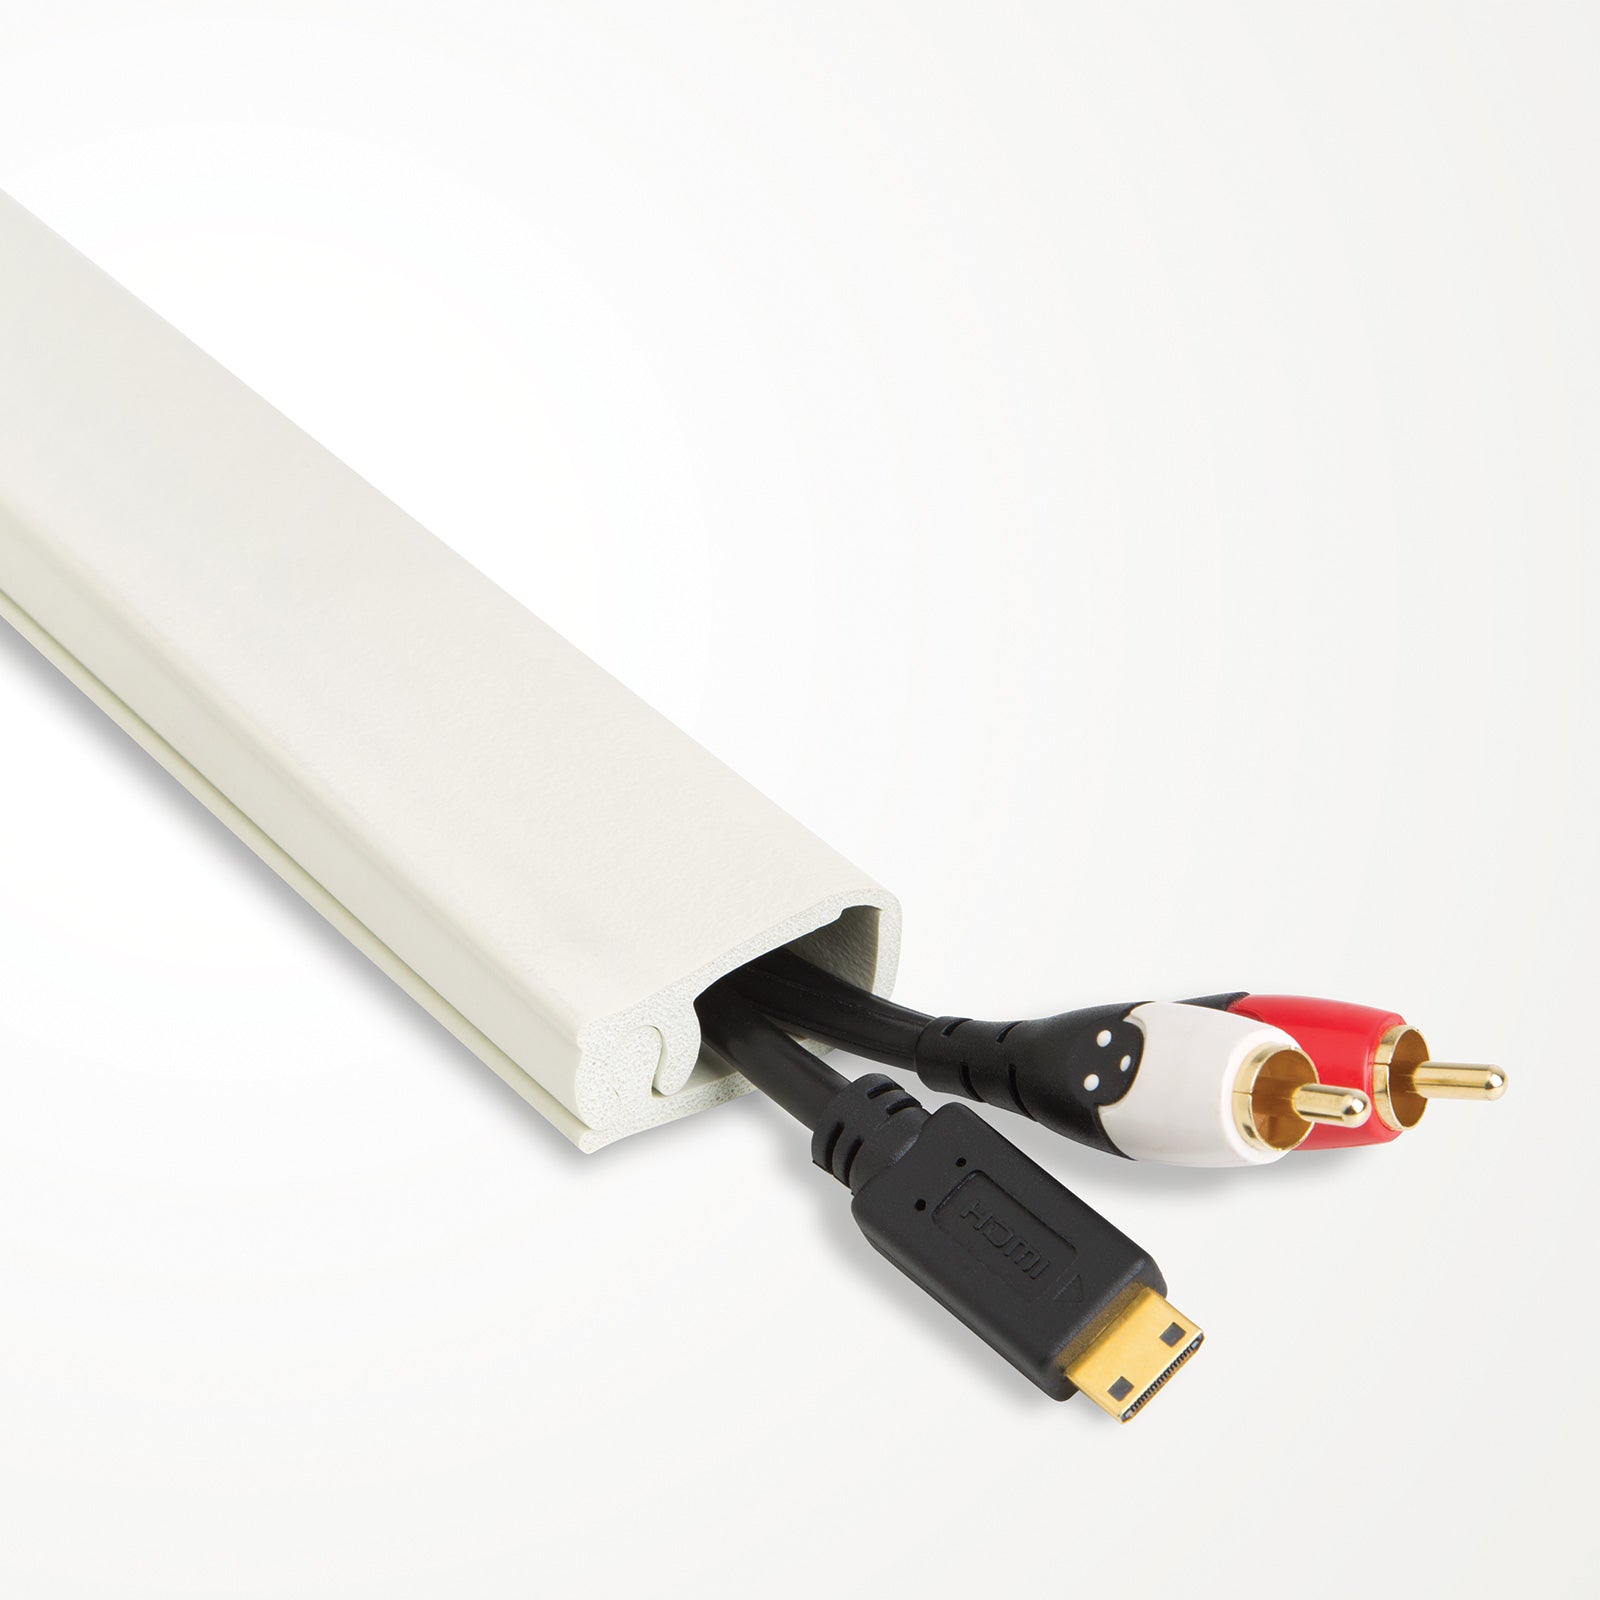 Cable Raceway On-Wall Cord Cover Small Size Channel to Hide and Conceal  Cords, Cables, or Wires